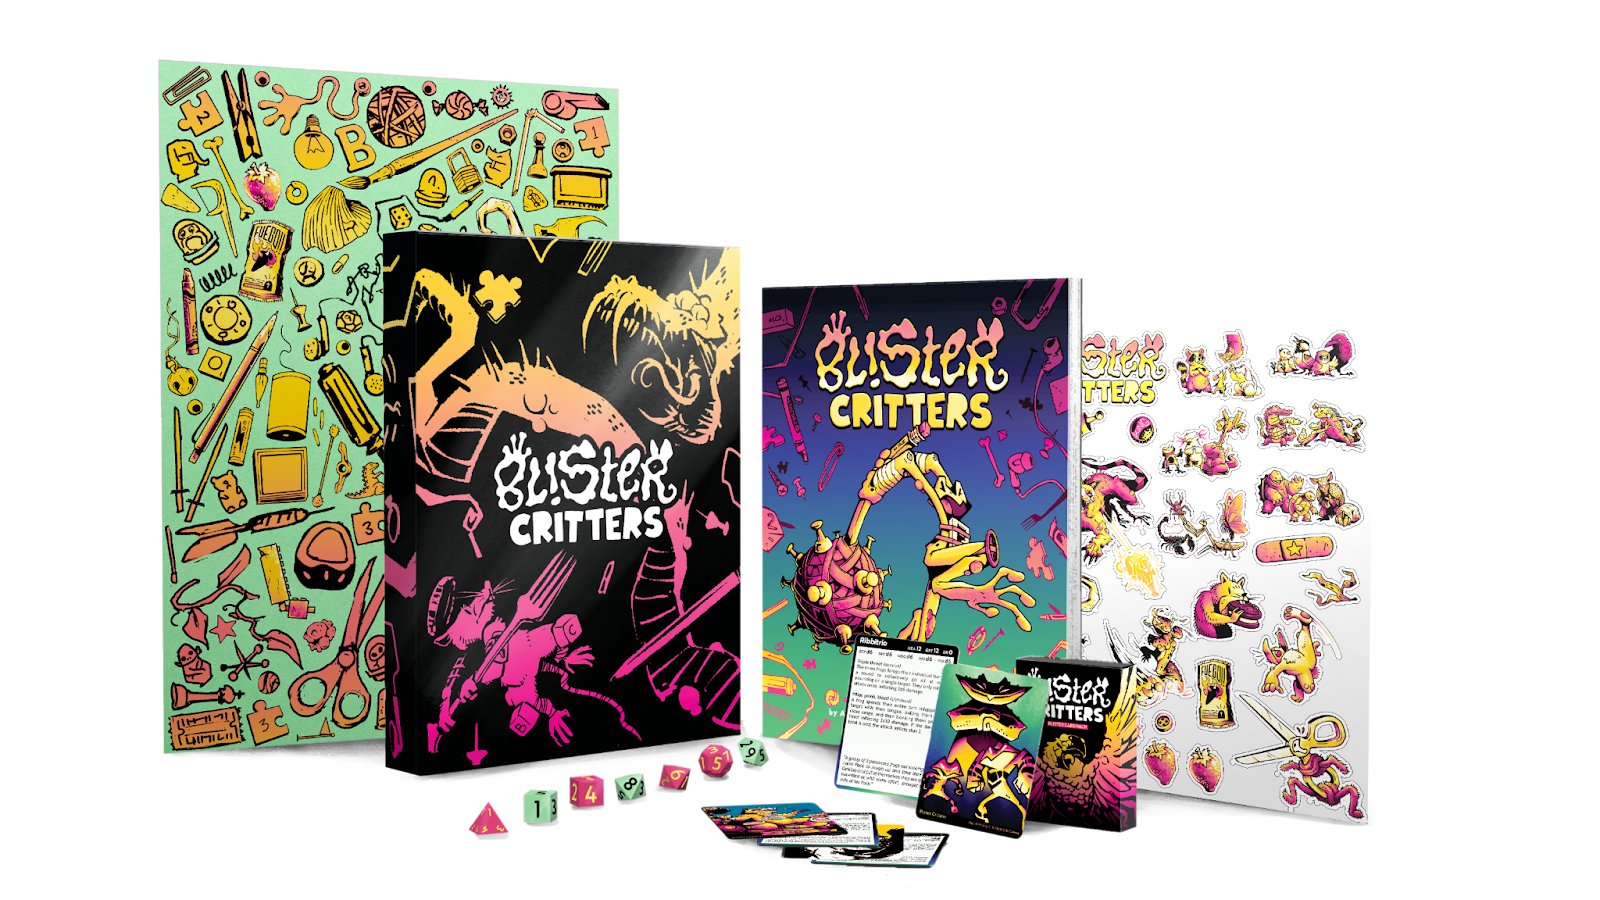 The contents of the Blister Critters box set: poster, dice, rule book, cards, sticker sheet